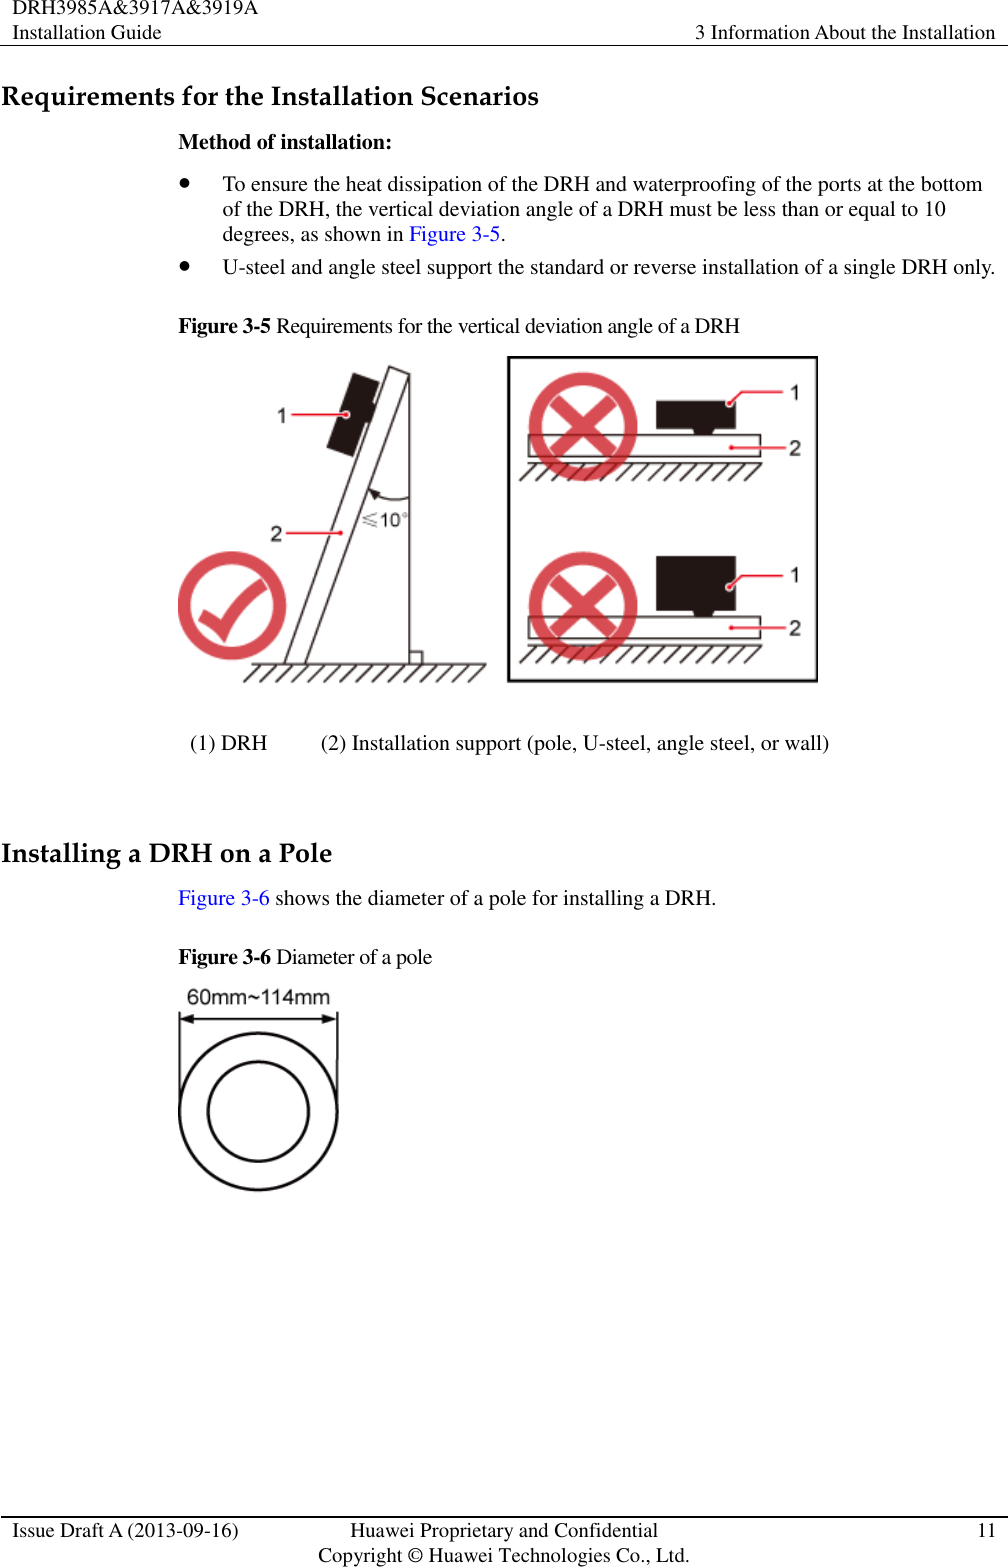 DRH3985A&amp;3917A&amp;3919A Installation Guide 3 Information About the Installation  Issue Draft A (2013-09-16) Huawei Proprietary and Confidential                                     Copyright © Huawei Technologies Co., Ltd. 11  Requirements for the Installation Scenarios Method of installation:  To ensure the heat dissipation of the DRH and waterproofing of the ports at the bottom of the DRH, the vertical deviation angle of a DRH must be less than or equal to 10 degrees, as shown in Figure 3-5.  U-steel and angle steel support the standard or reverse installation of a single DRH only. Figure 3-5 Requirements for the vertical deviation angle of a DRH  (1) DRH (2) Installation support (pole, U-steel, angle steel, or wall)  Installing a DRH on a Pole Figure 3-6 shows the diameter of a pole for installing a DRH. Figure 3-6 Diameter of a pole   